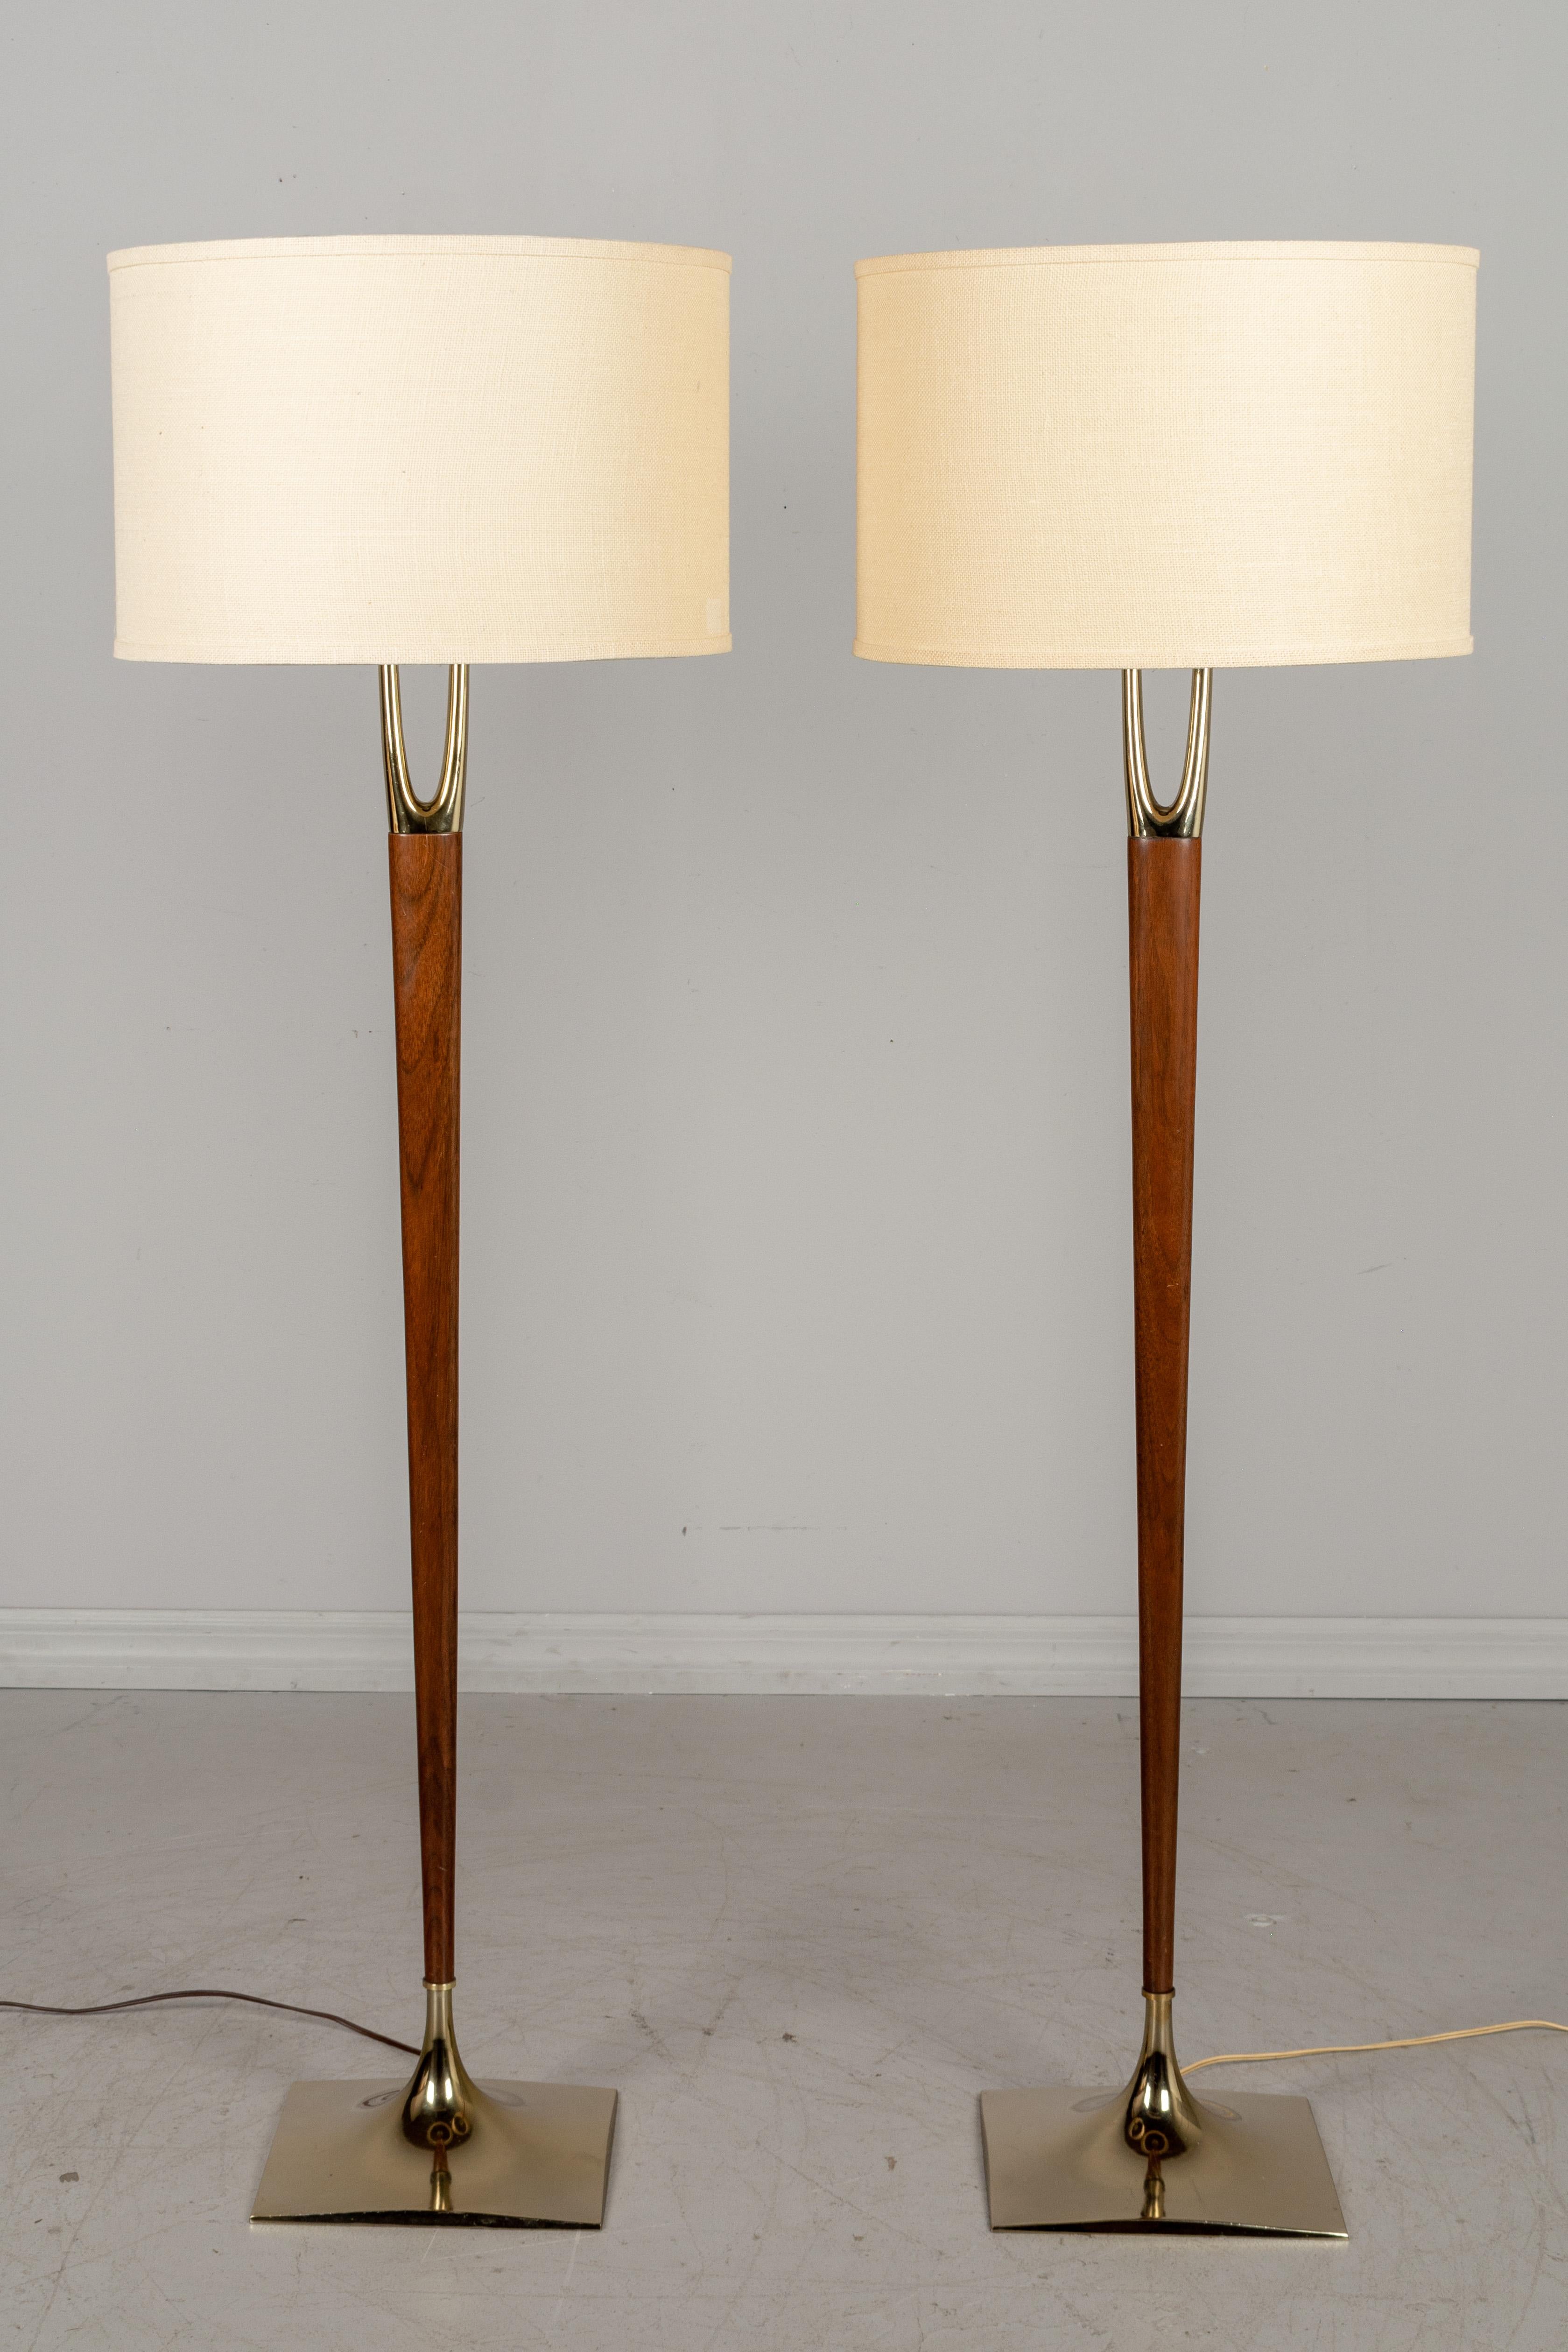 A rare pair of iconic, sought after Mid-Century Modern floor lamps designed by Gerald Thurston and made by the Laurel Lamp Company. Solid walnut center post with brass-plated wishbone shaped prong at top and a brass-plated base. Original wide